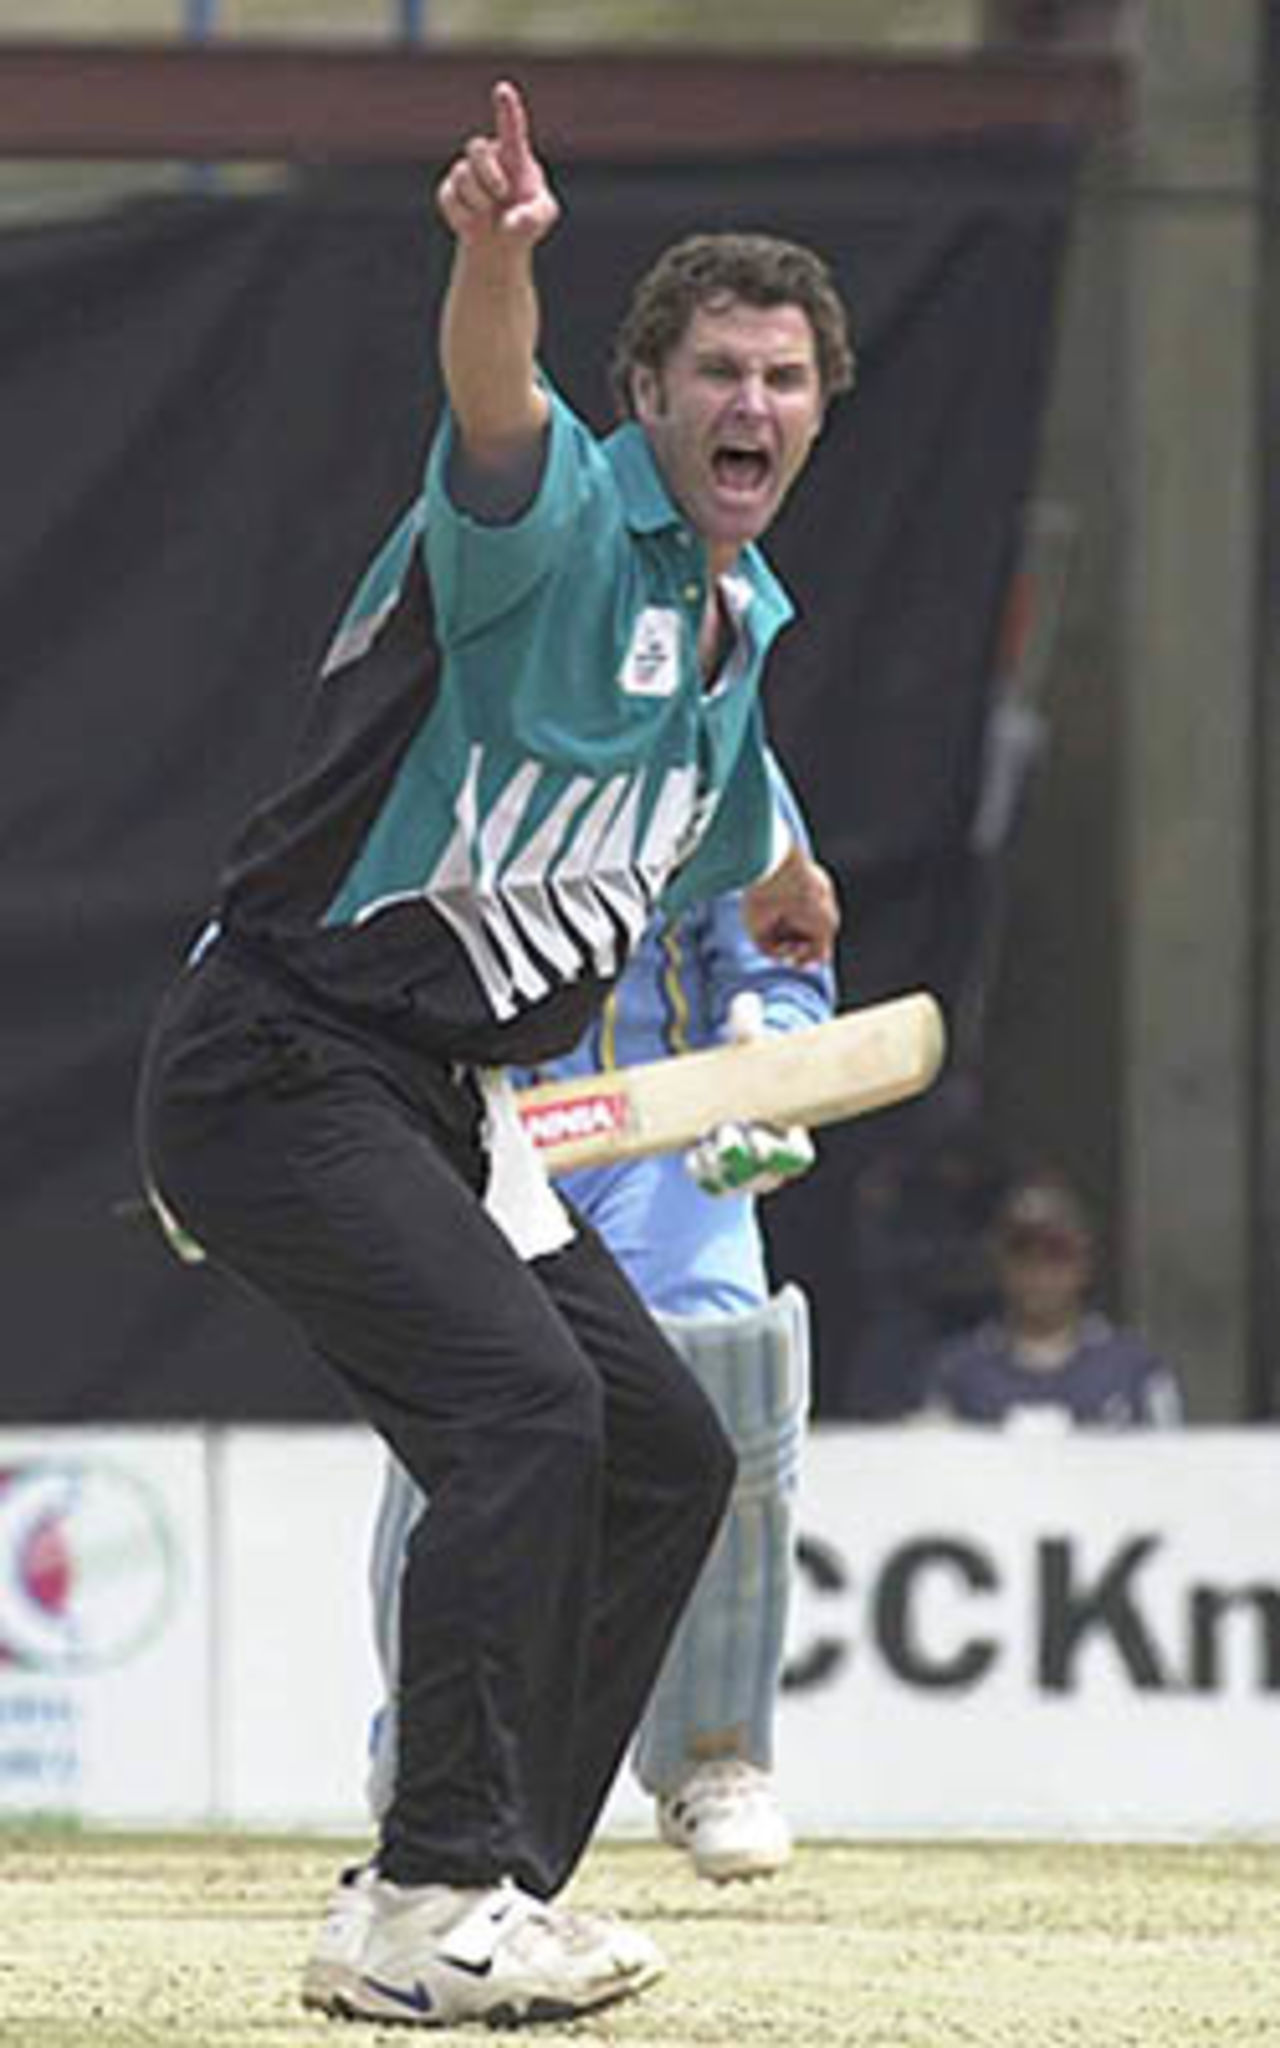 Chris Cairns appealing for LBW, ICC KnockOut, 2000/01, Final, India v New Zealand, Gymkhana Club Ground, Nairobi, 15 October 2000.